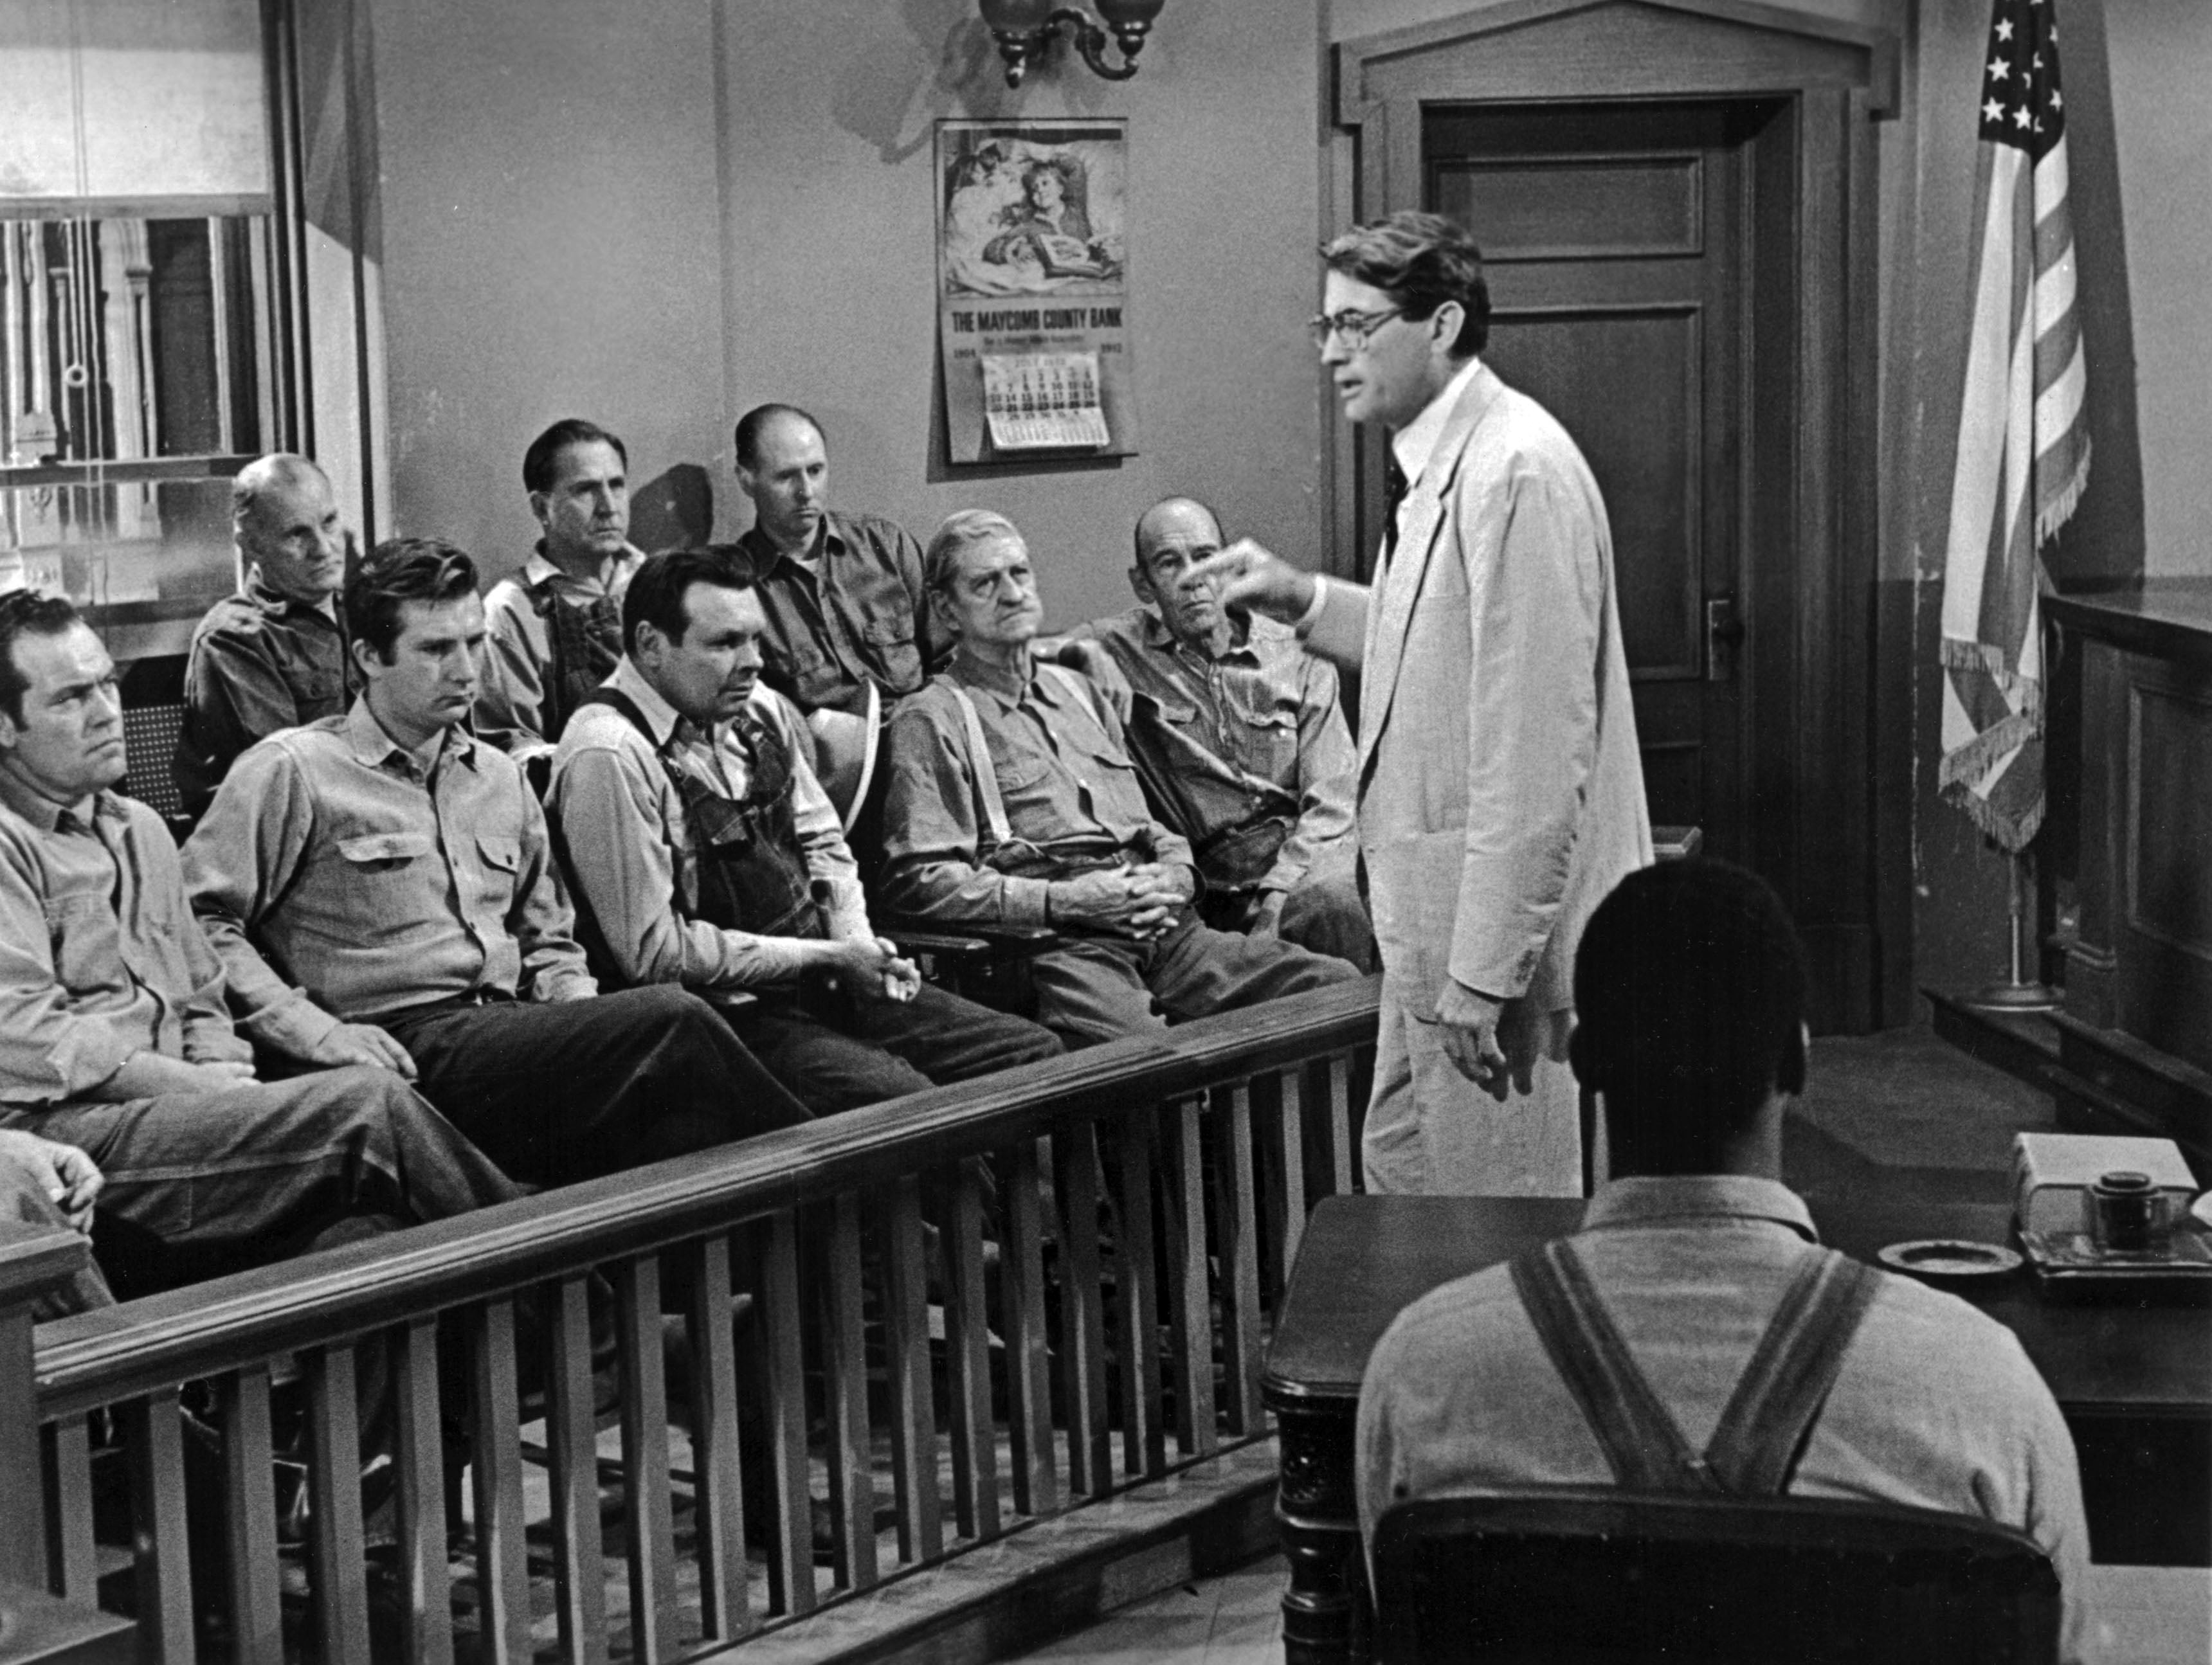 Atticus addressed the court in To Kill a Mockingbird